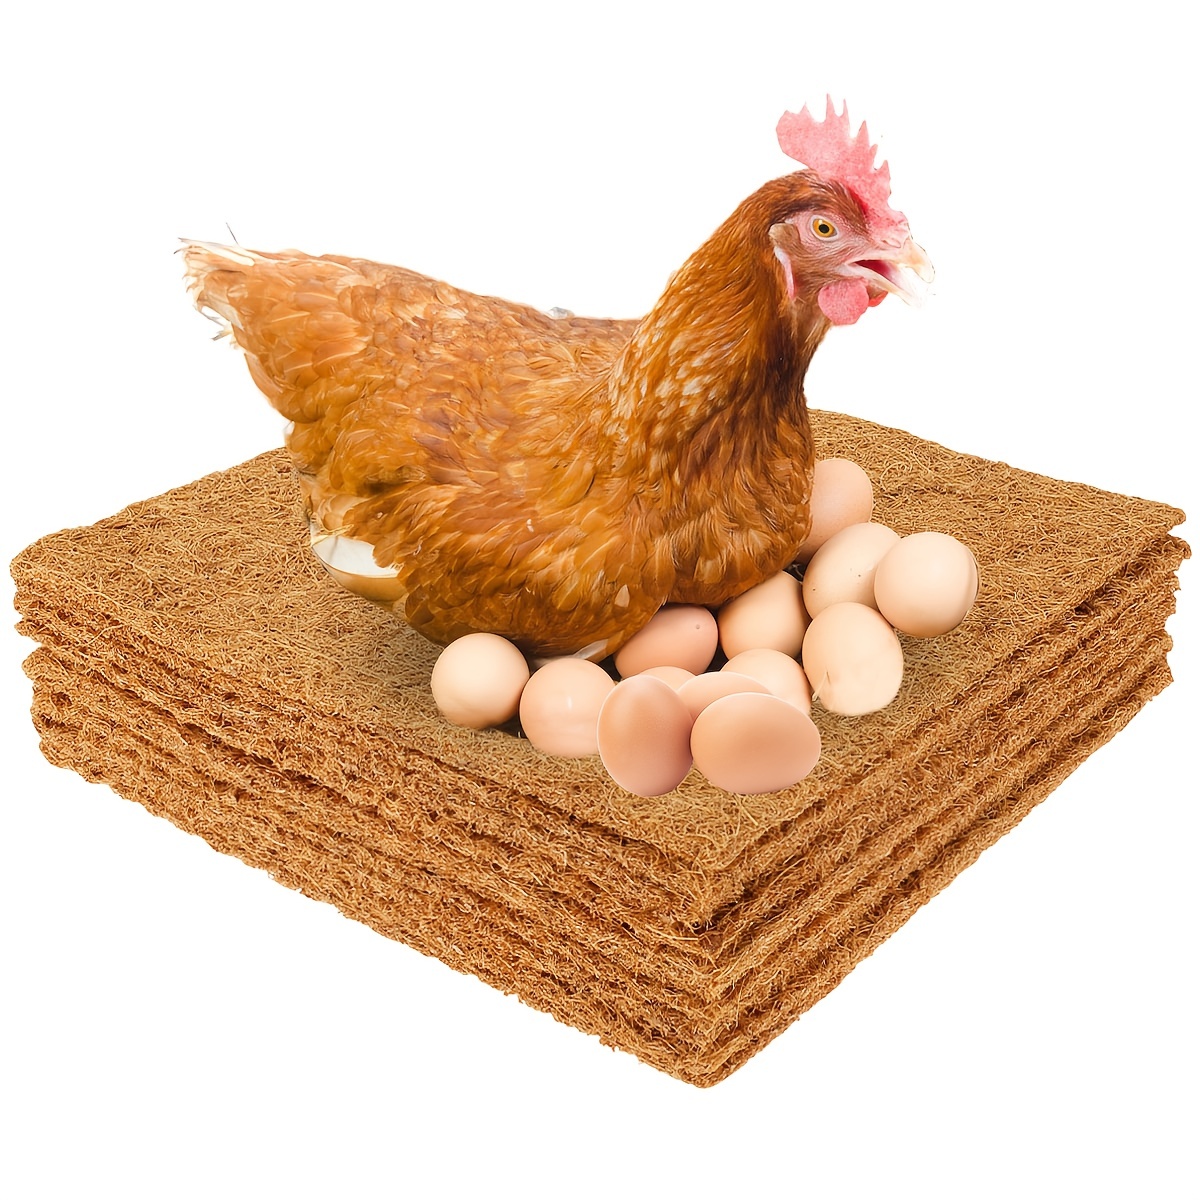 

10pcs, Chicken Nesting Pads Reusable Hens Nest Bedding Mats Natural Coconut Palm Hens Nesting Pad 13 X 13 Inches Multifunctional Chicken Nesting Box Liners For Hen Laying Eggs